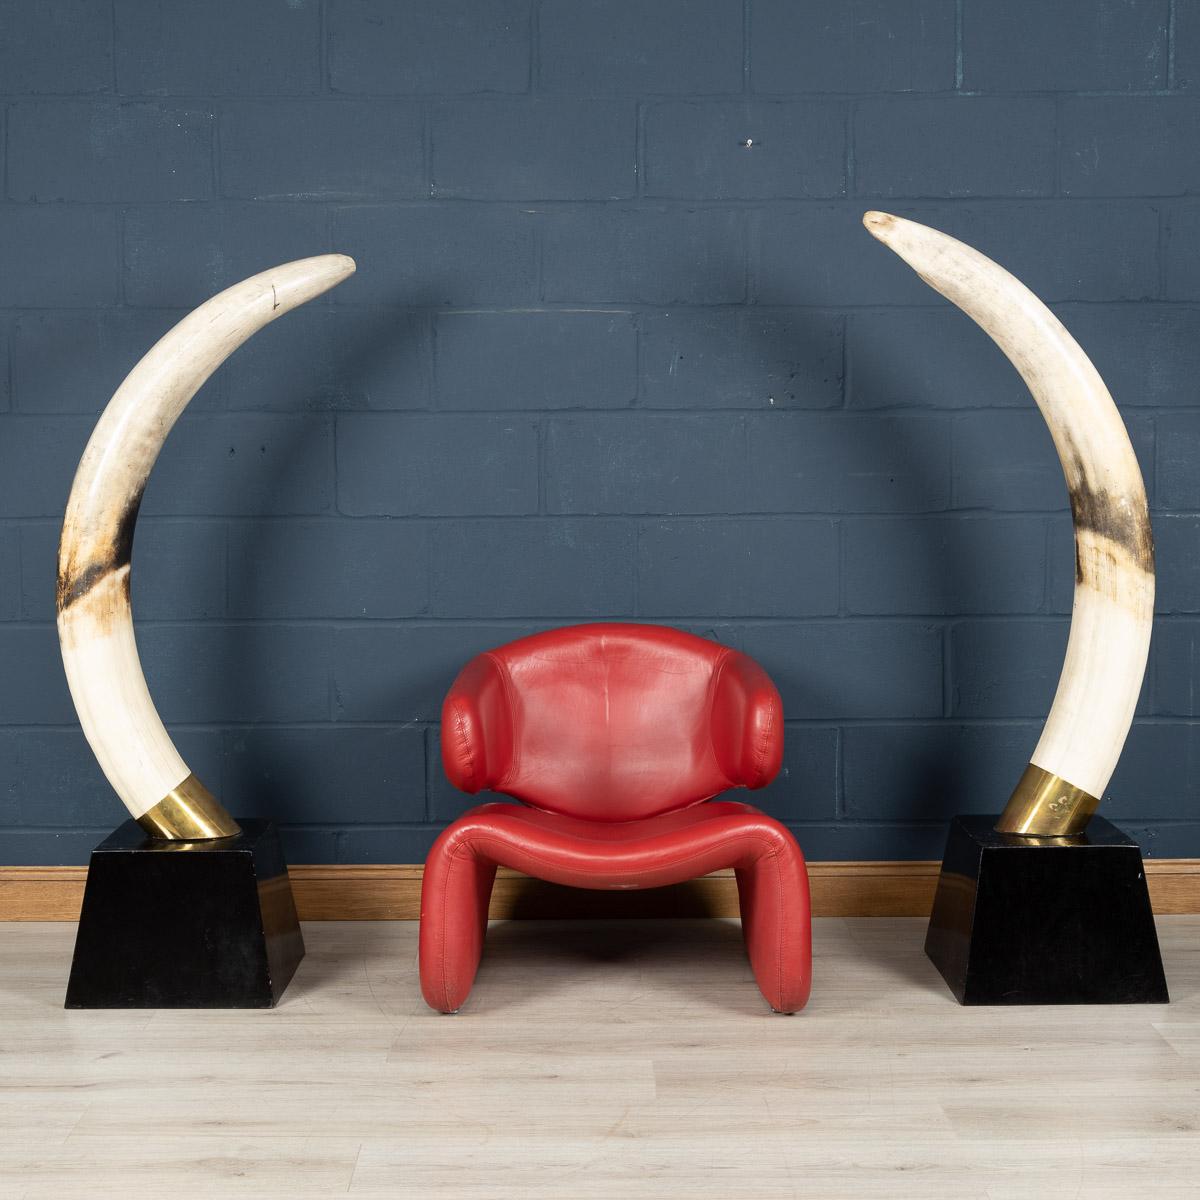 Contemporary Pair of Massive 21st Century Resin Tusks by Anthony Redmile London